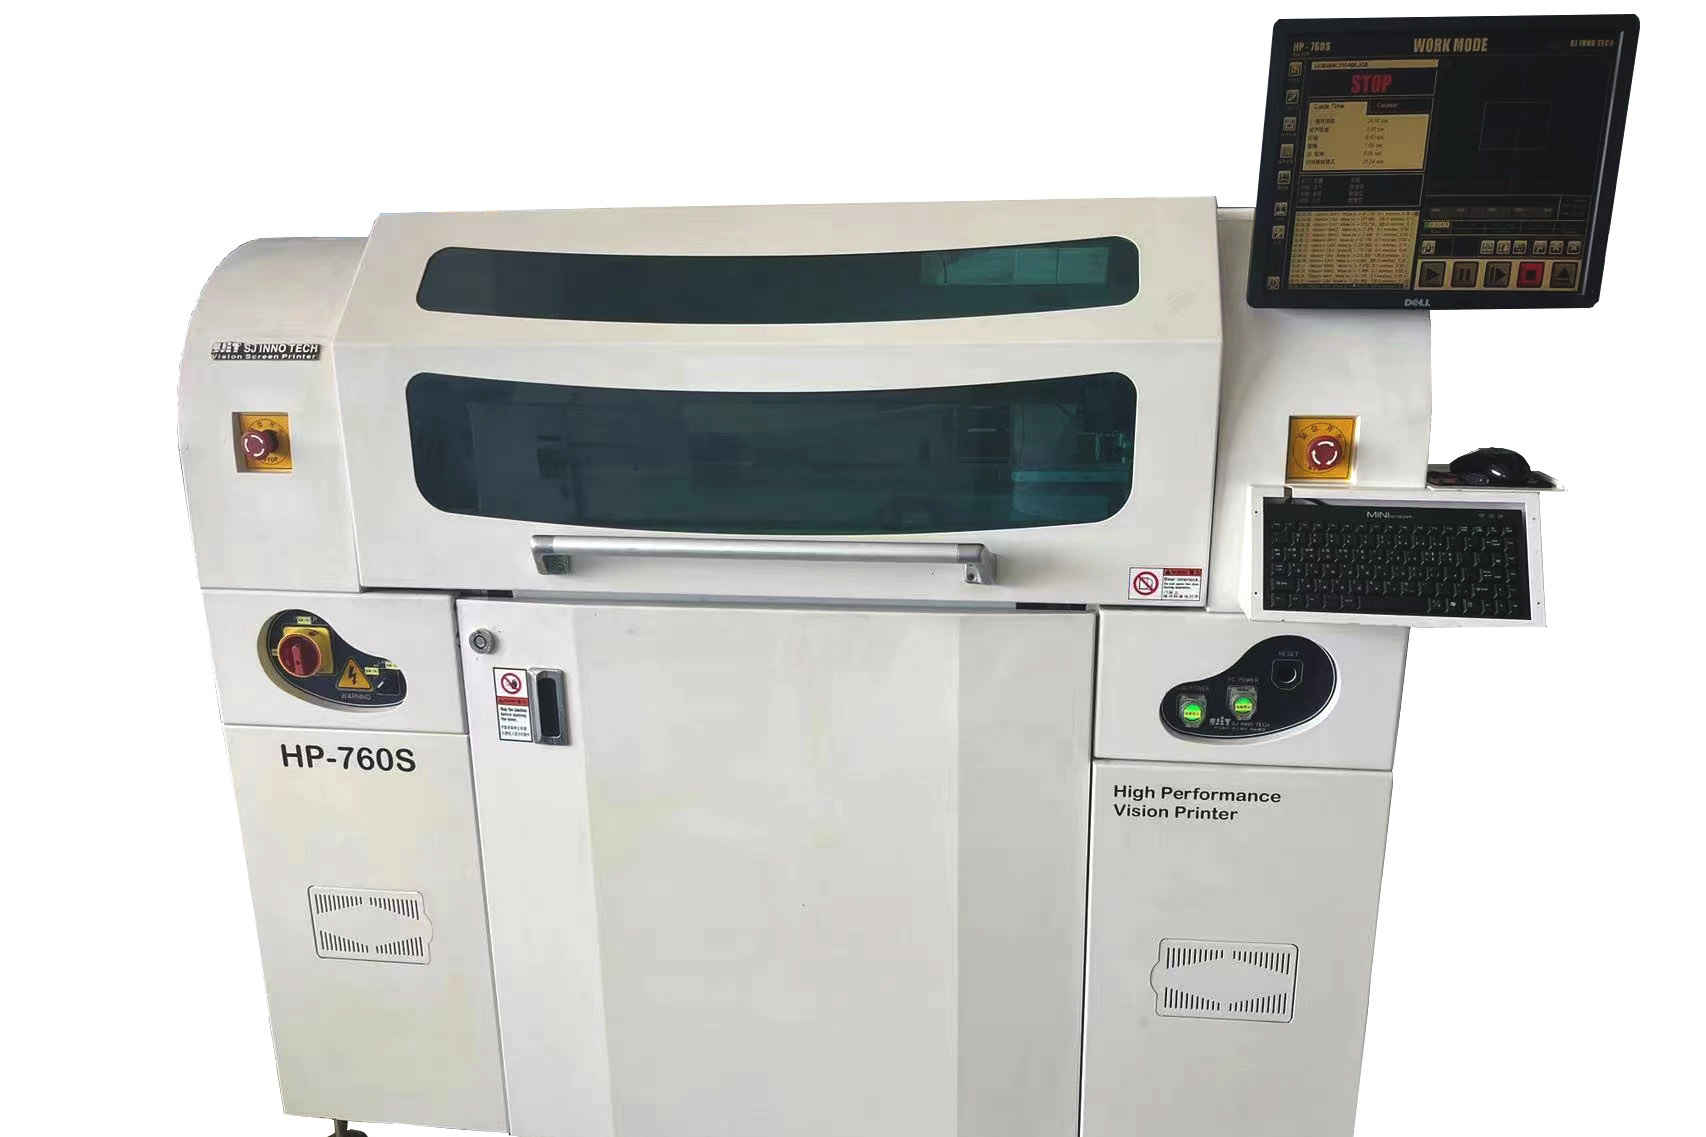 Function and importance of the used smt printer